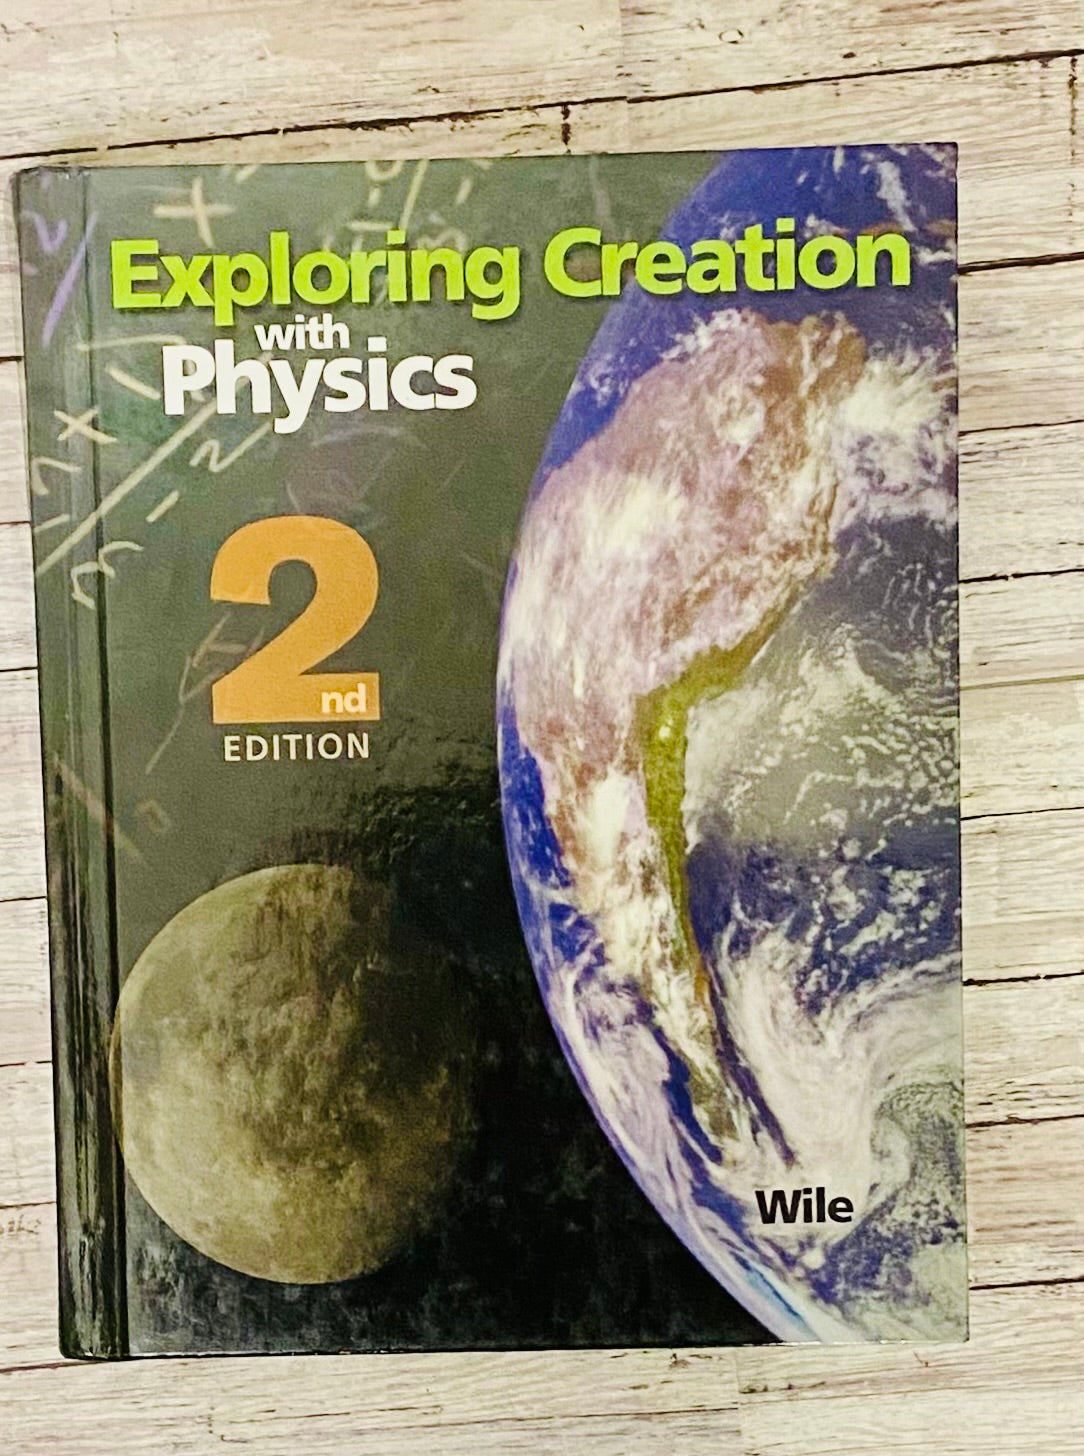 Exploring Creation with Physics Textbook 2nd Edition - Anchored Homeschool Resource Center